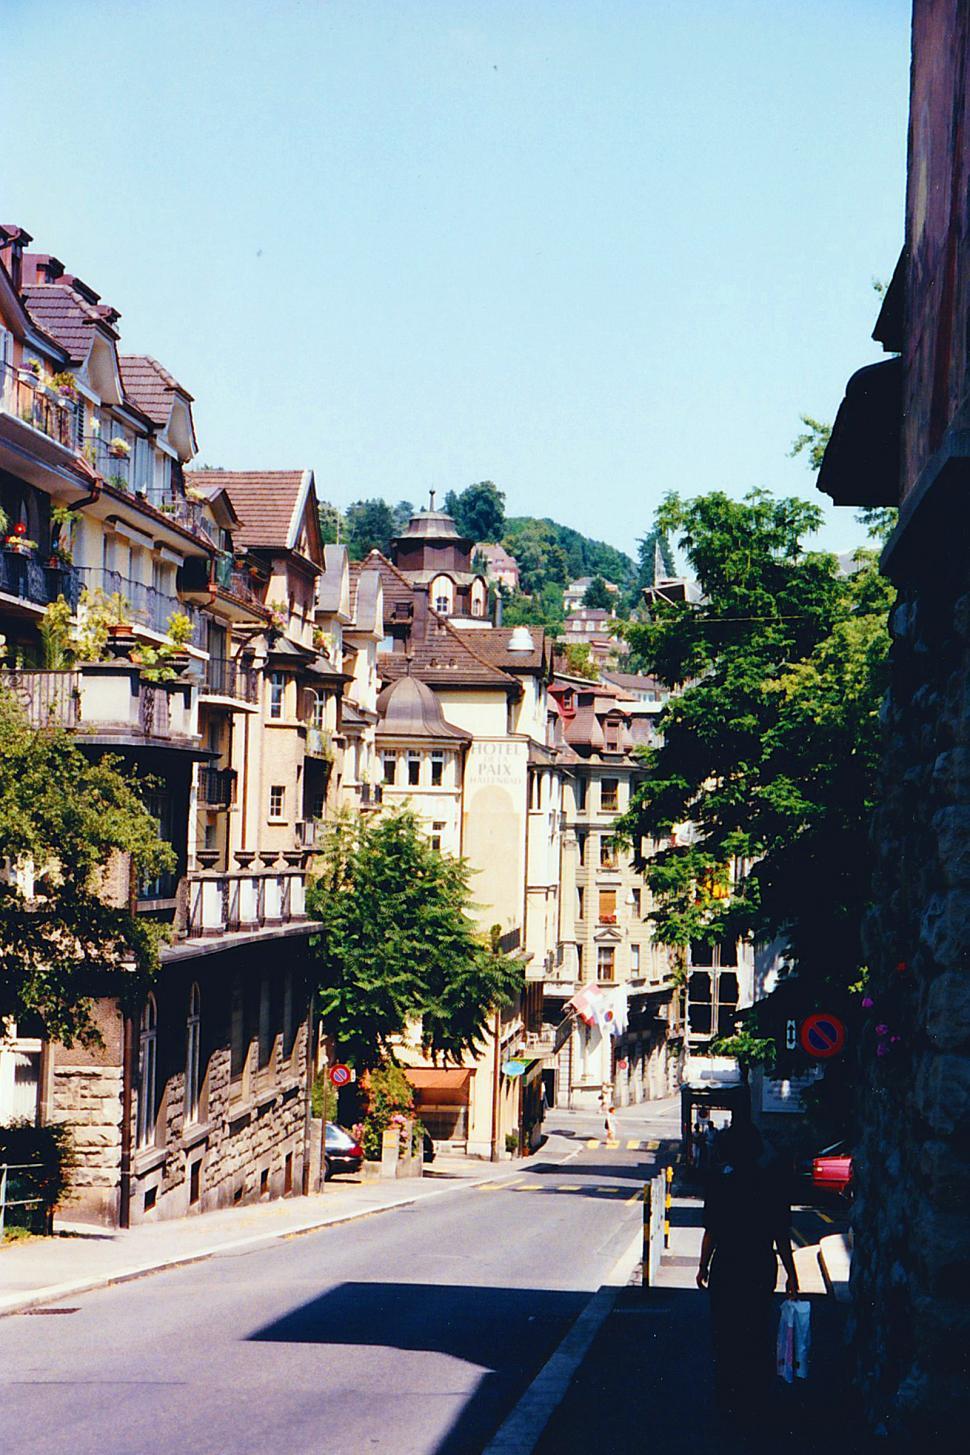 Free Image of Hilly Street 